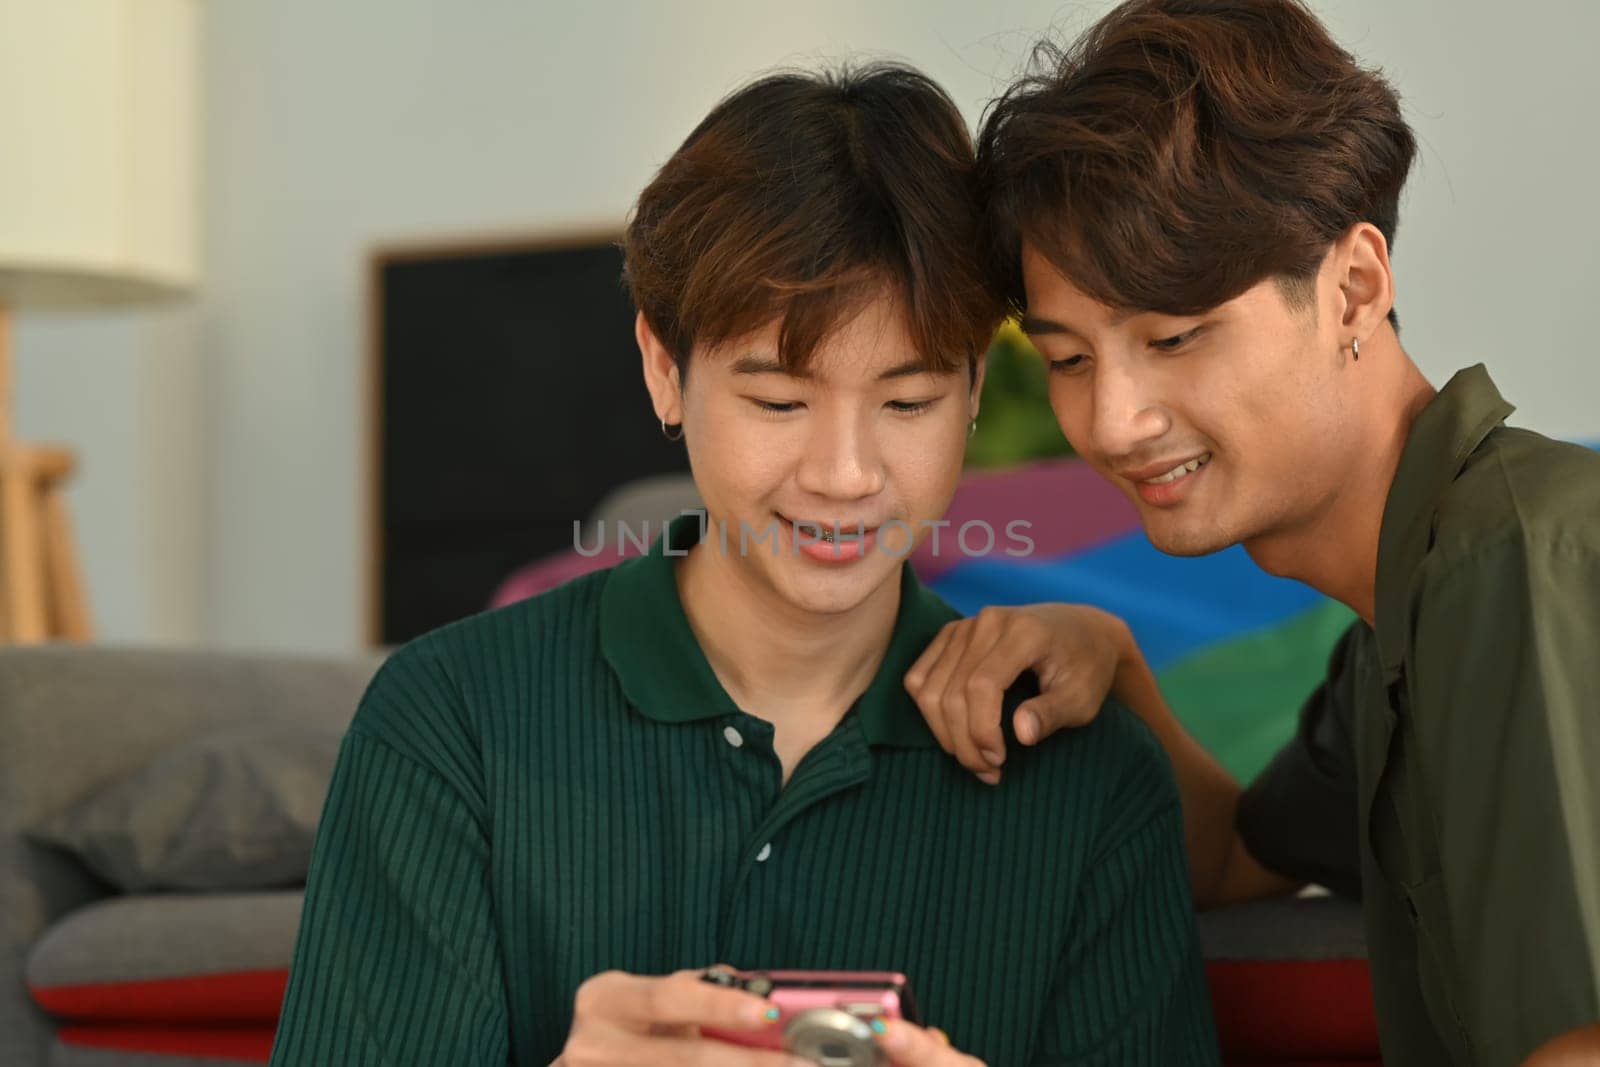 Joyful gay couple taking a selfie with compact camera in living room rainbow flag in background. LGBT, love and human rights concept by prathanchorruangsak